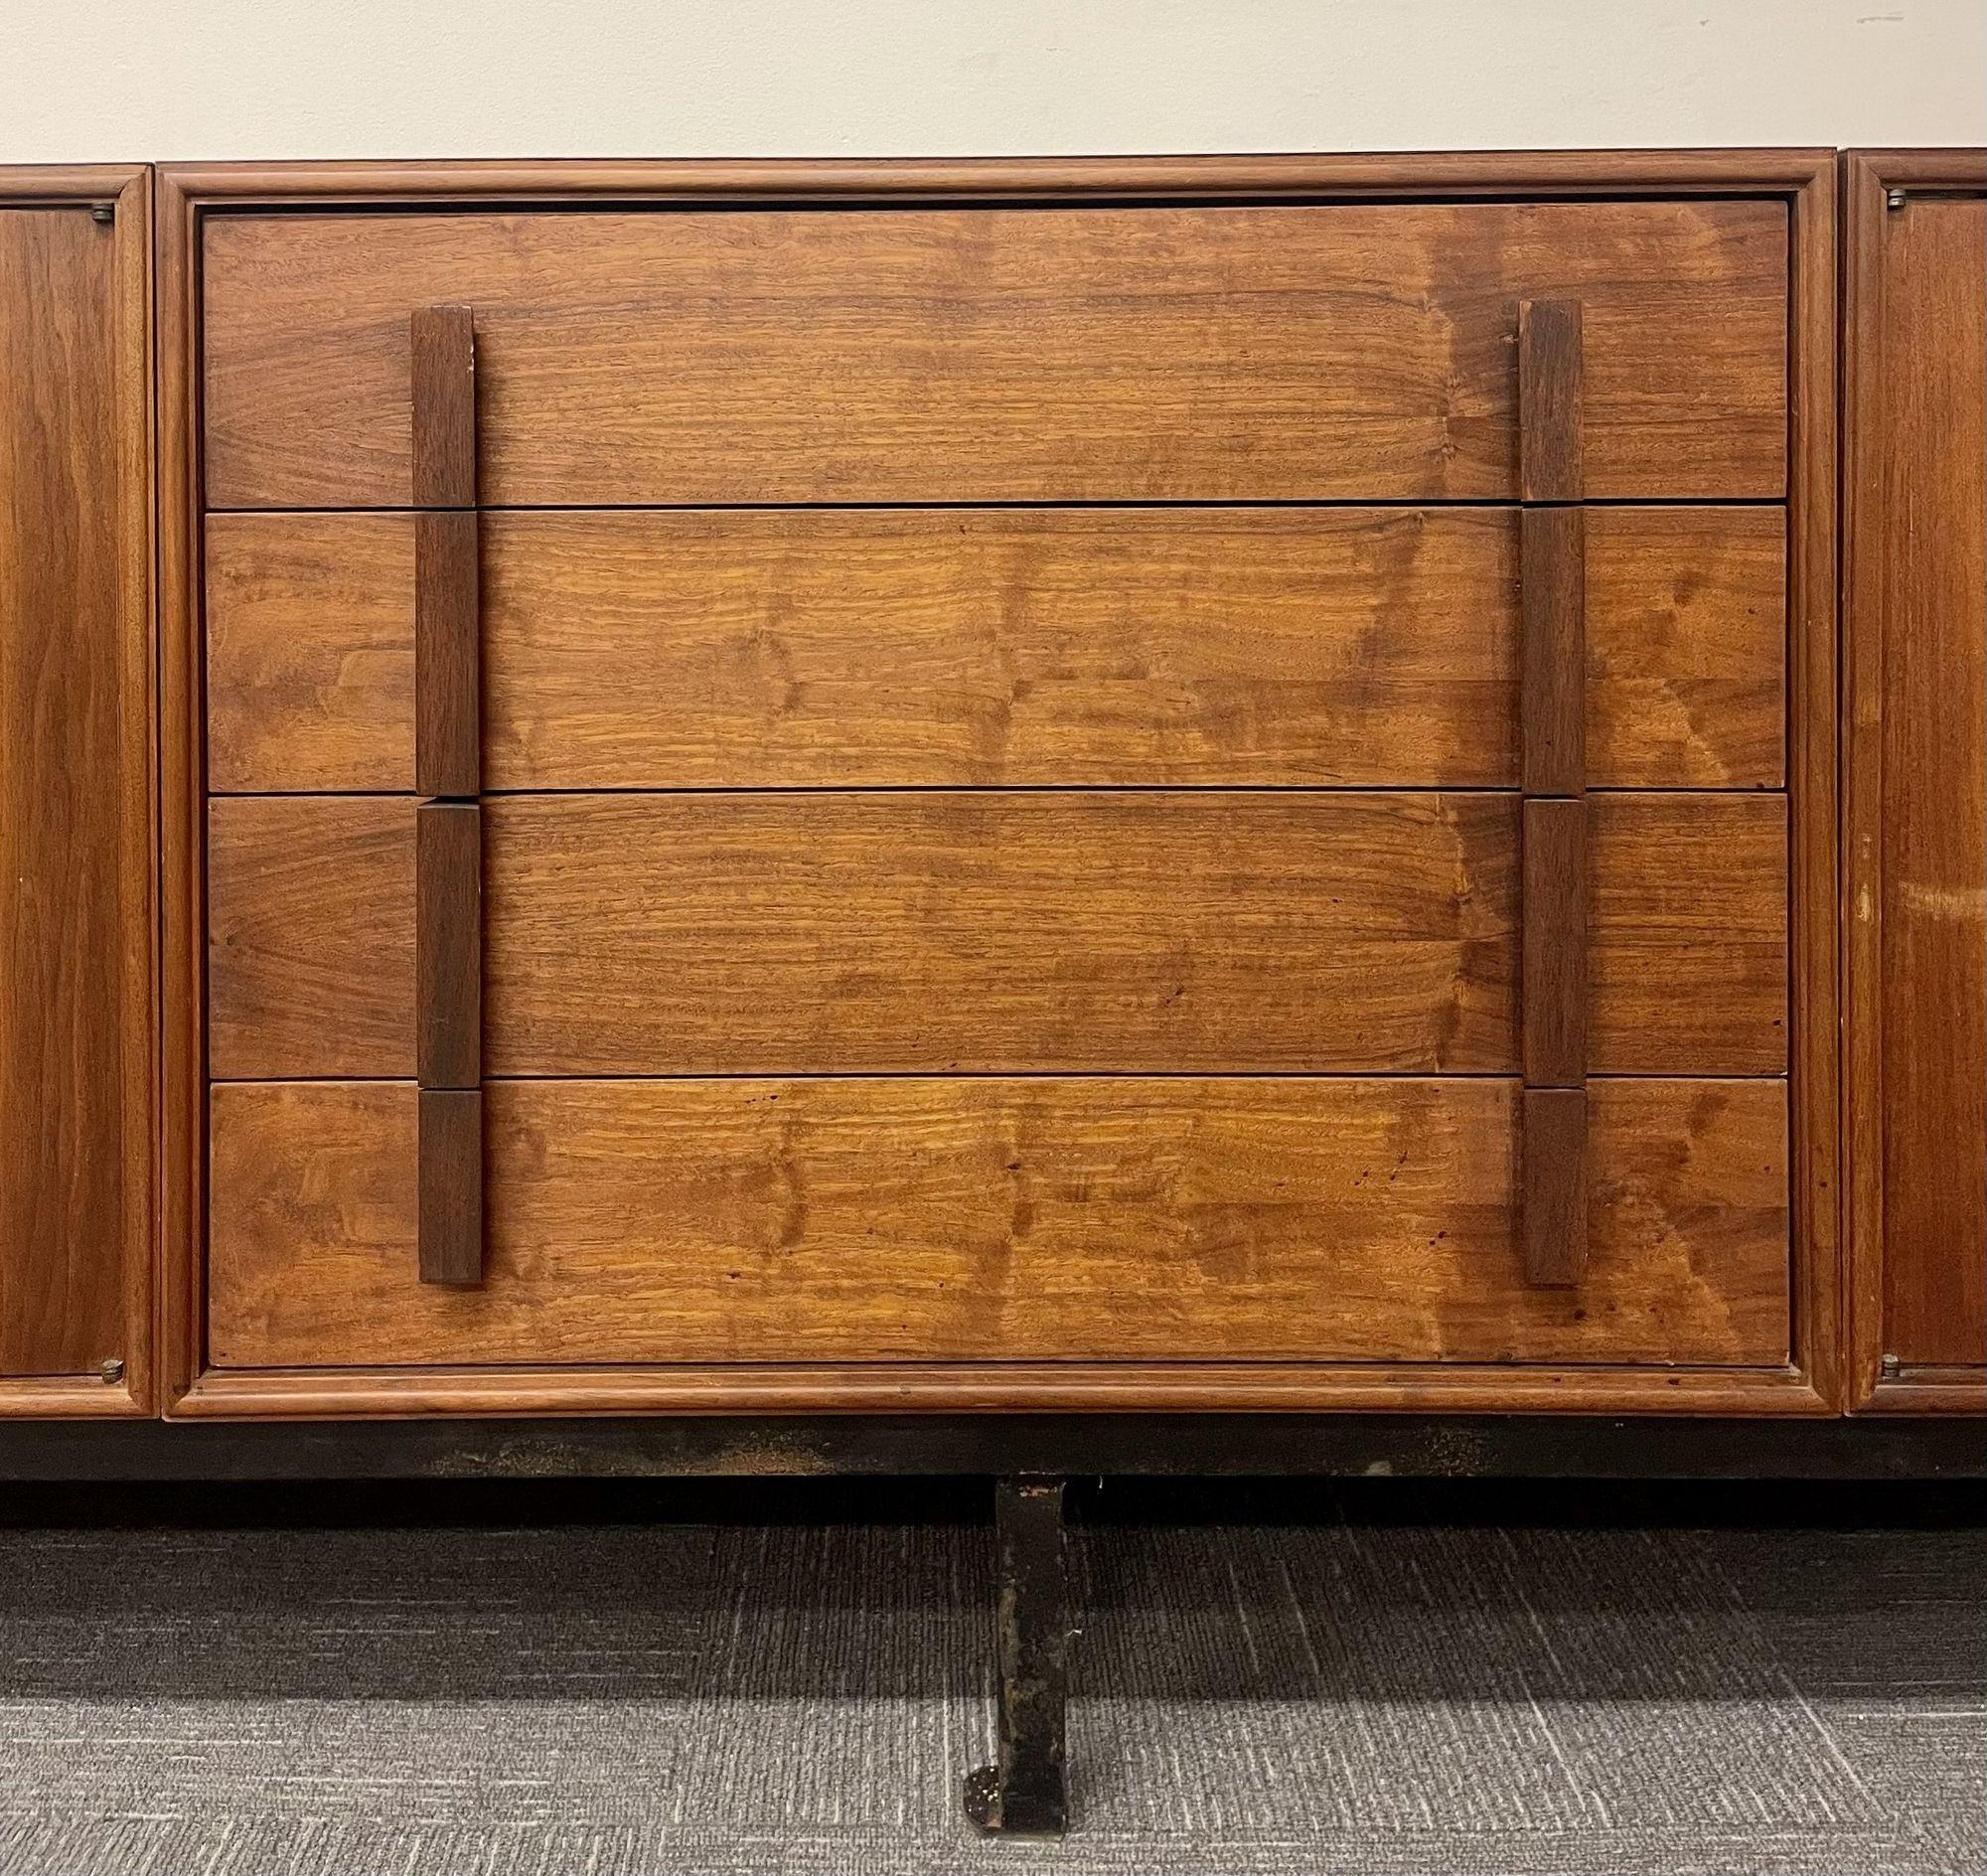 Mid-20th Century Mid-Century Modern 3 Section Server, Sideboard or Dresser For Sale